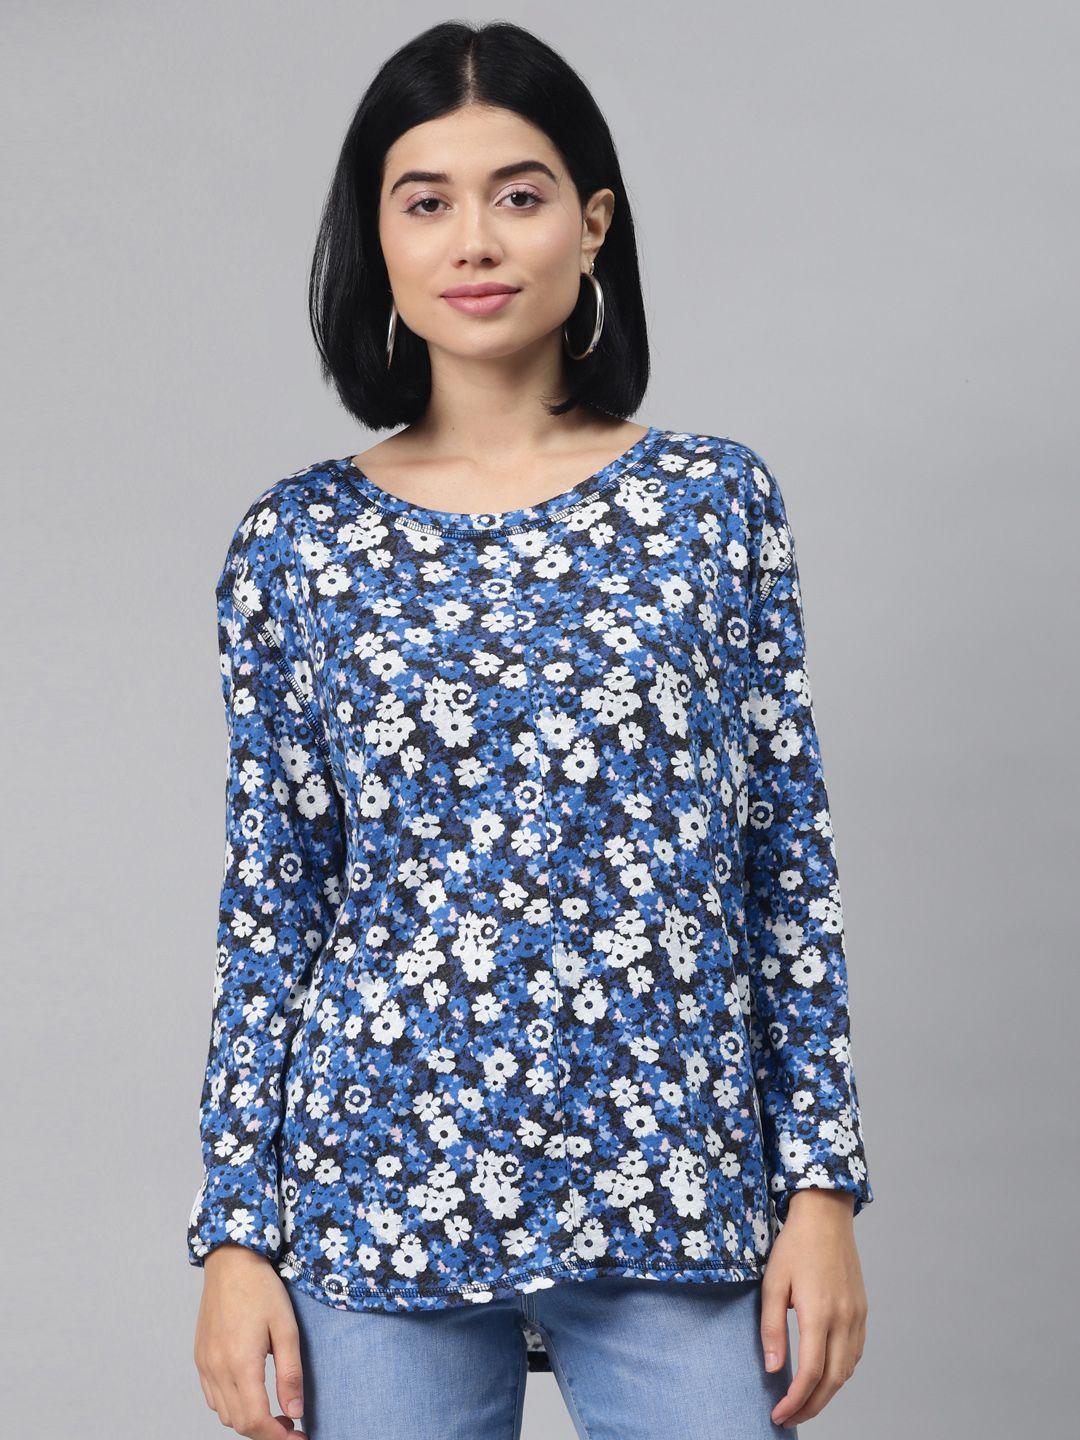 marks & spencer women blue & white floral printed round neck t-shirt